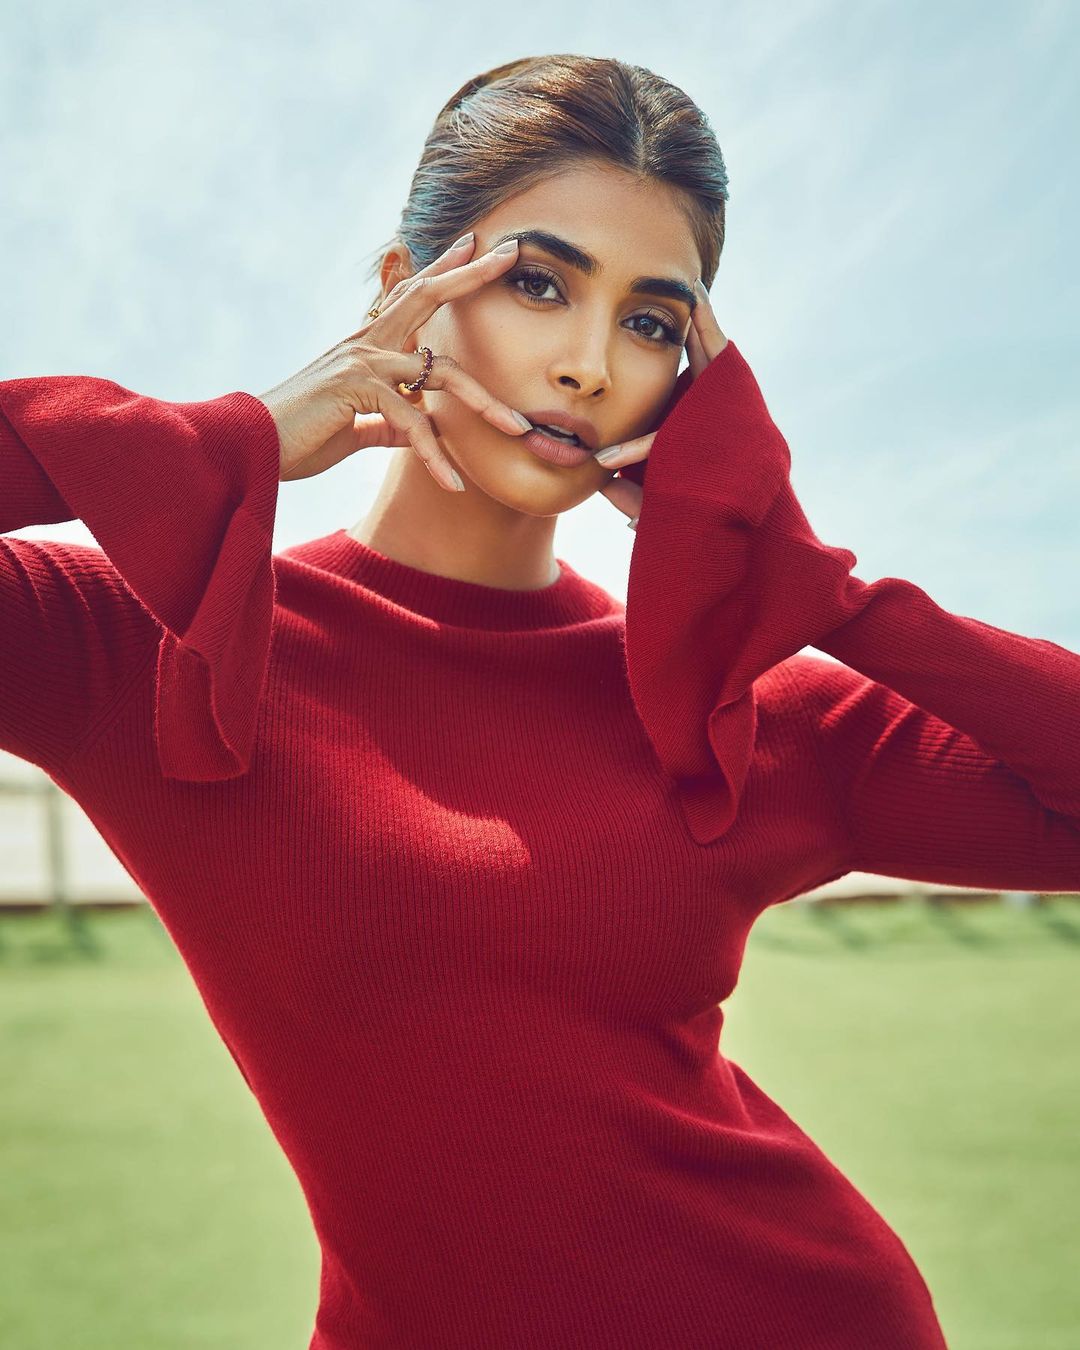 Radhe Shyam Actress Pooja Hegde Is An Epitome of Beauty and Style ...